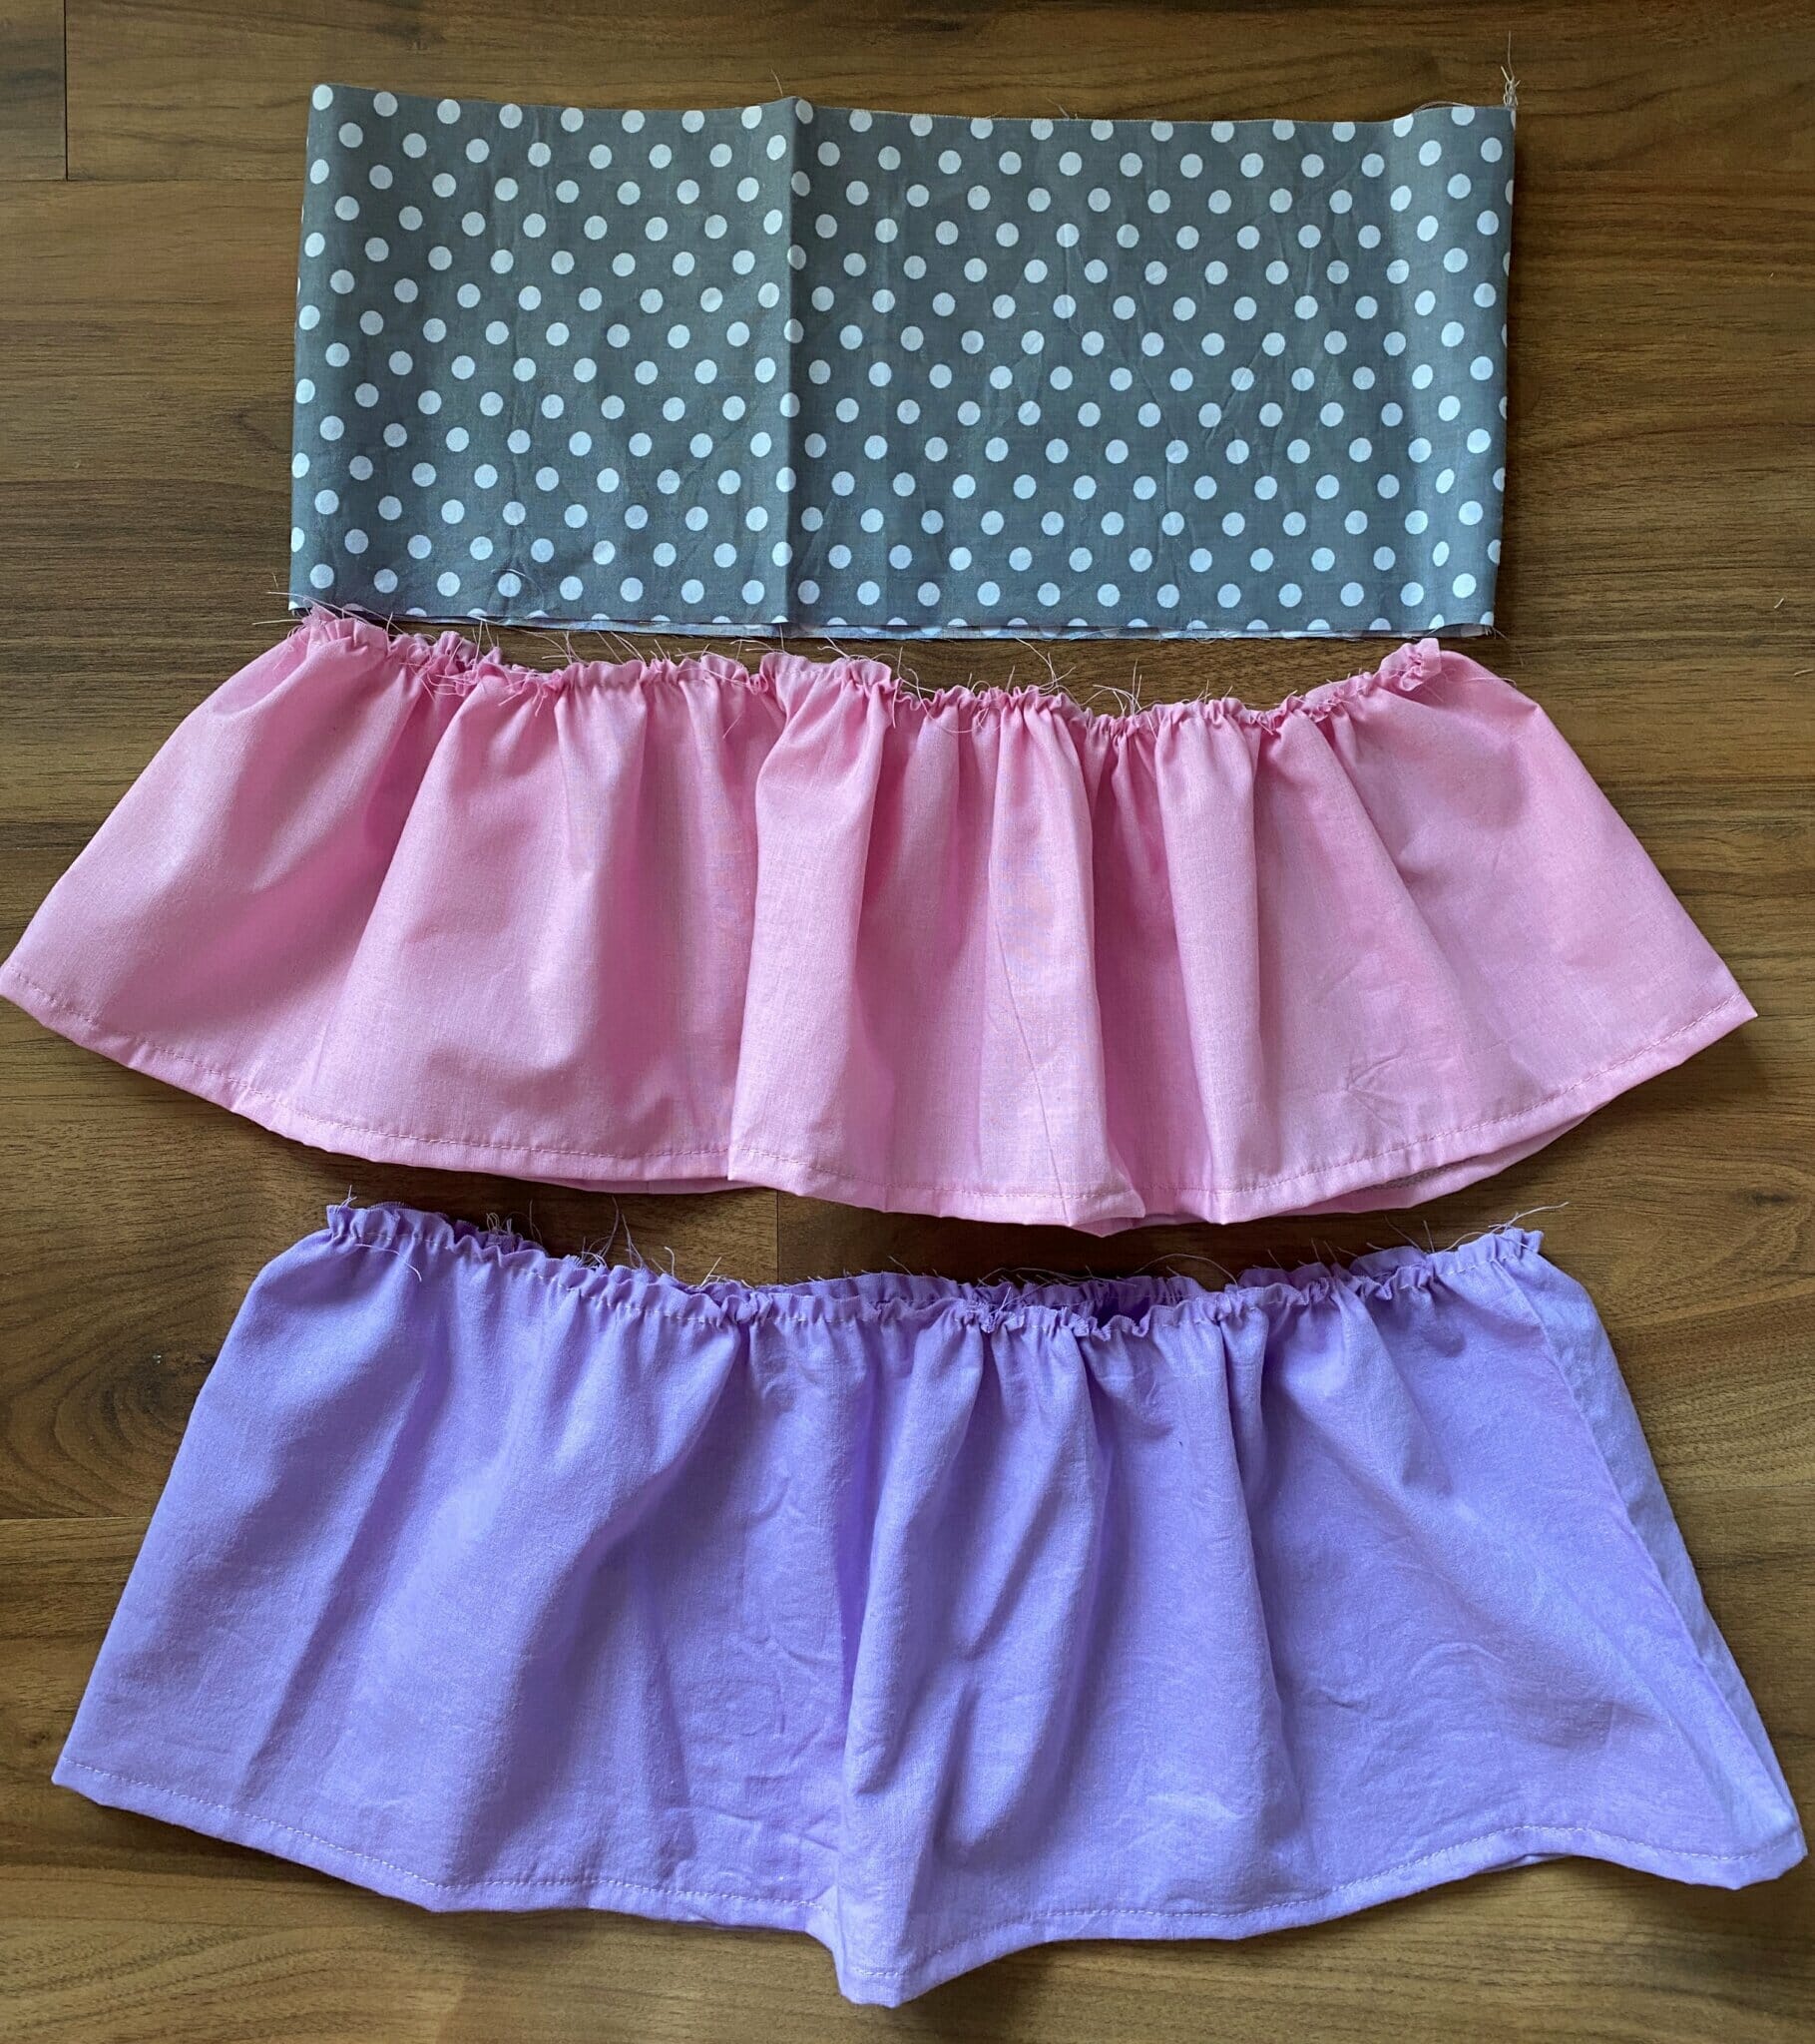 How To Make A Ruffle Skirt For Girls I Can Sew This